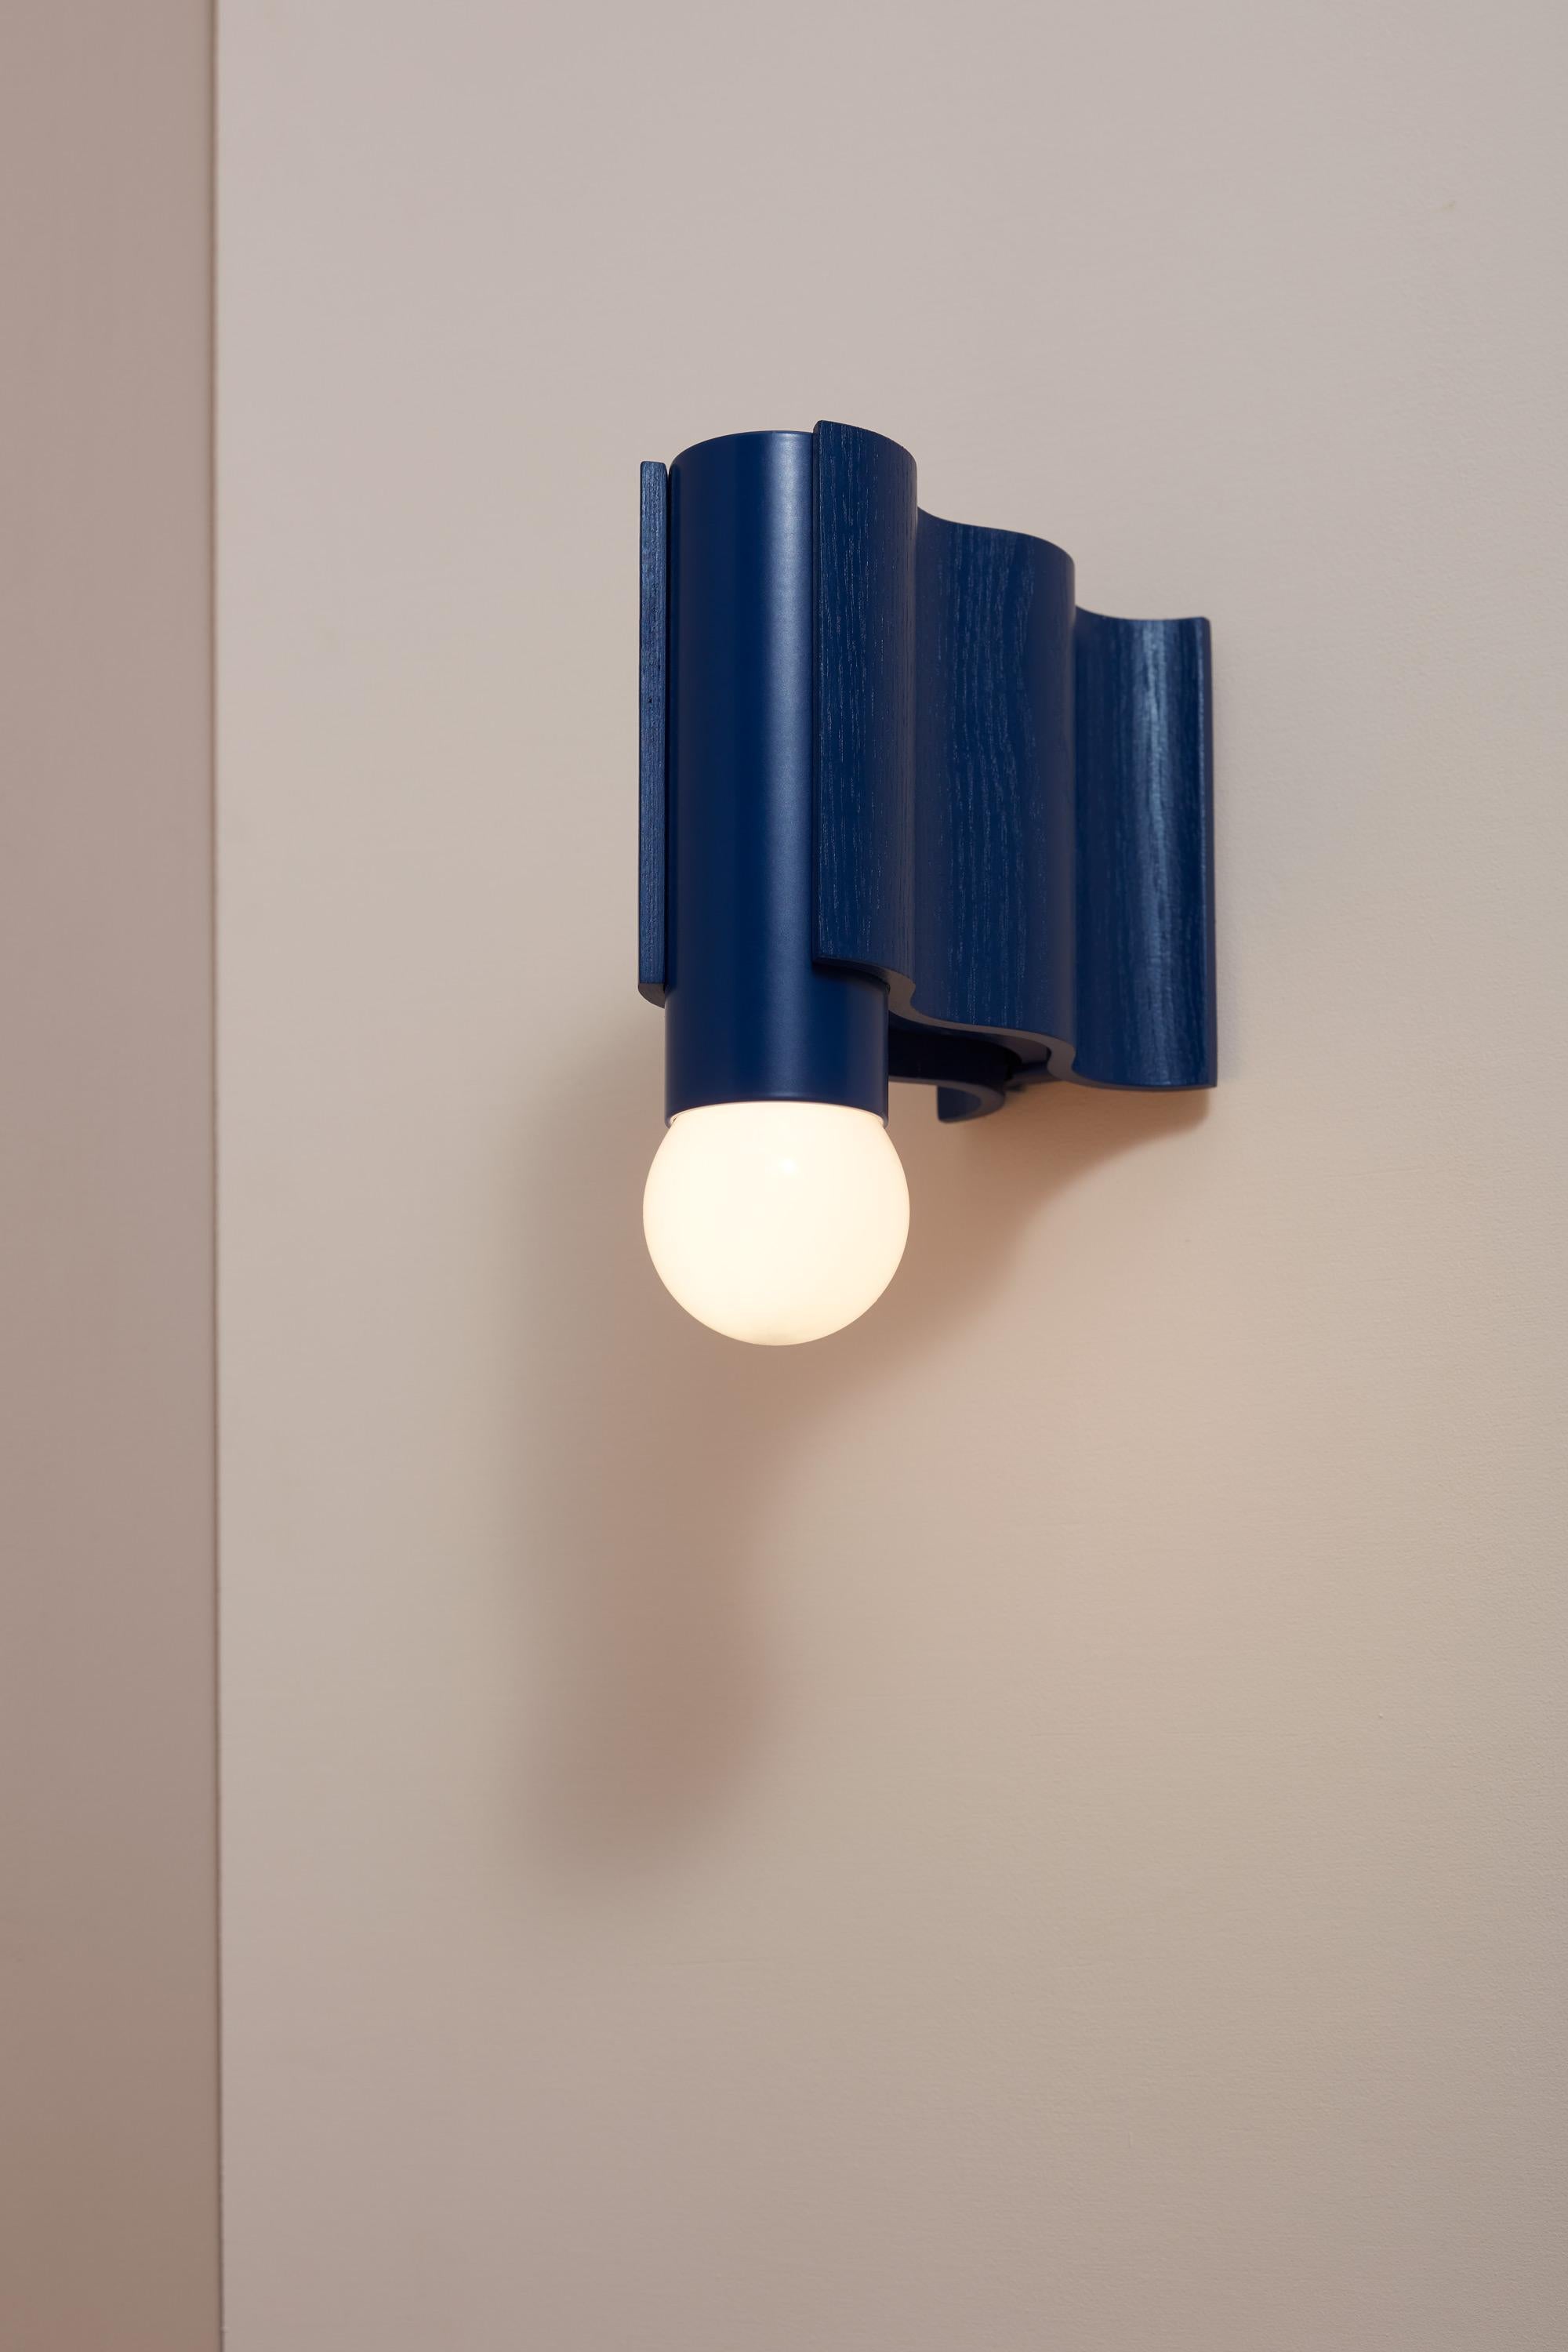 Single Corrugation Sconce / Wall Light in Natural Ash Veneer and Sapphire Blue For Sale 1